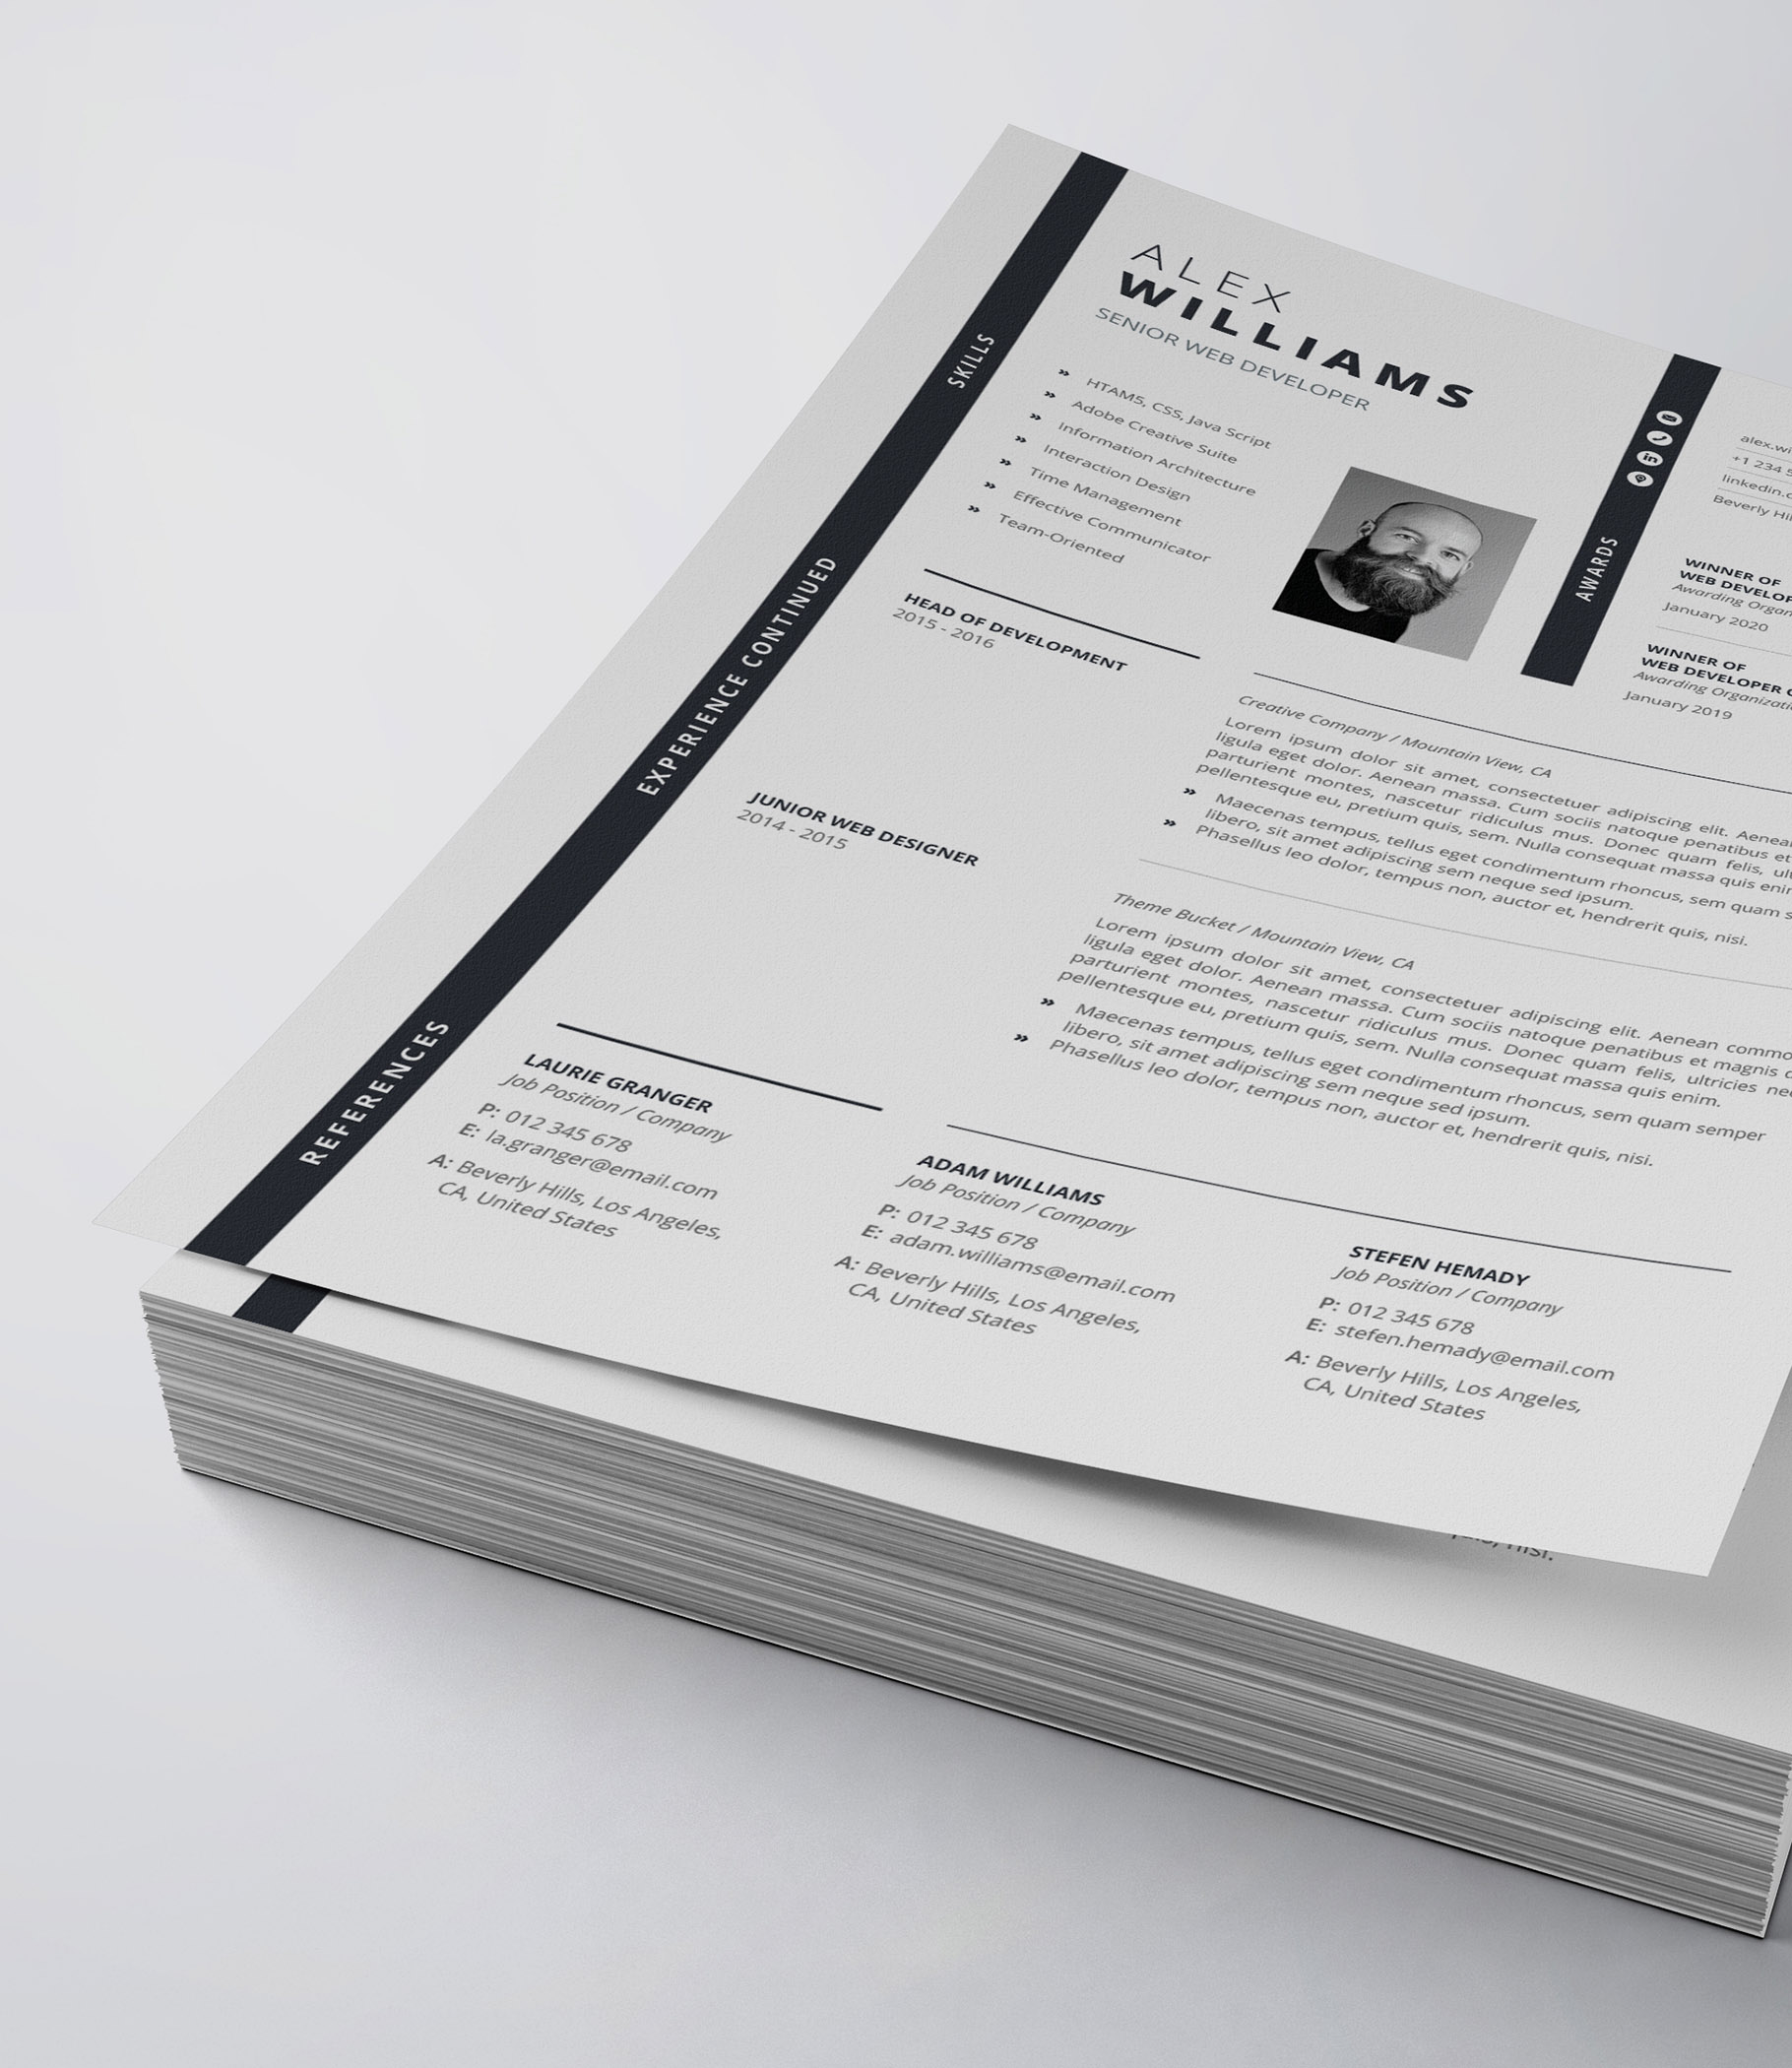 Clean and professional resume template on top of a stack of papers.